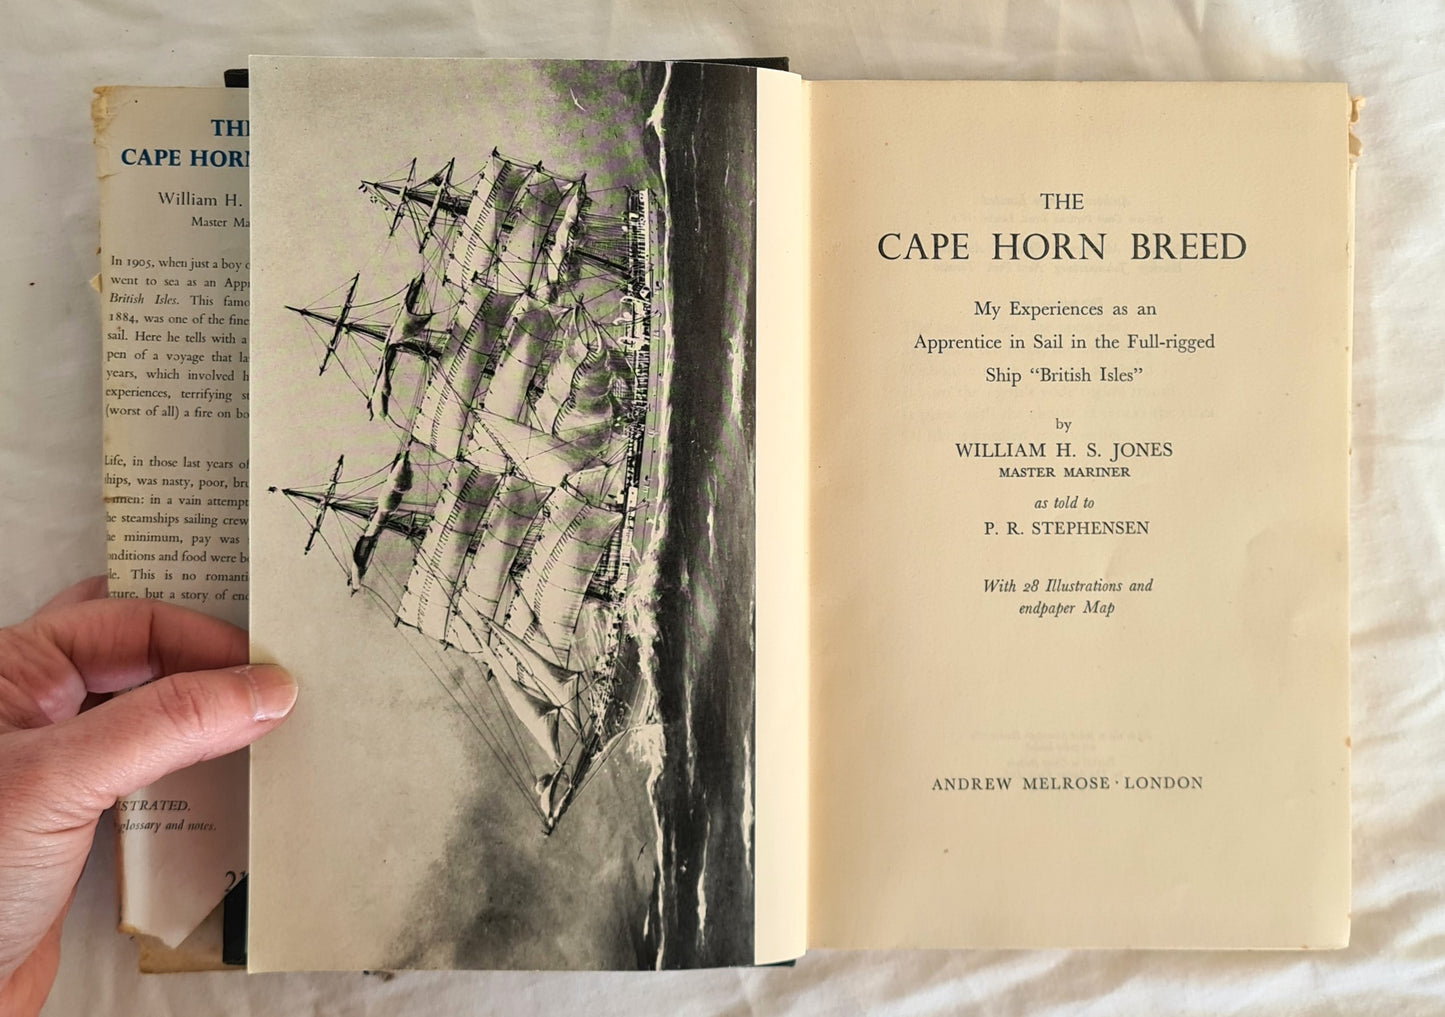 The Cape Horn Breed by Captain William H. S. Jones